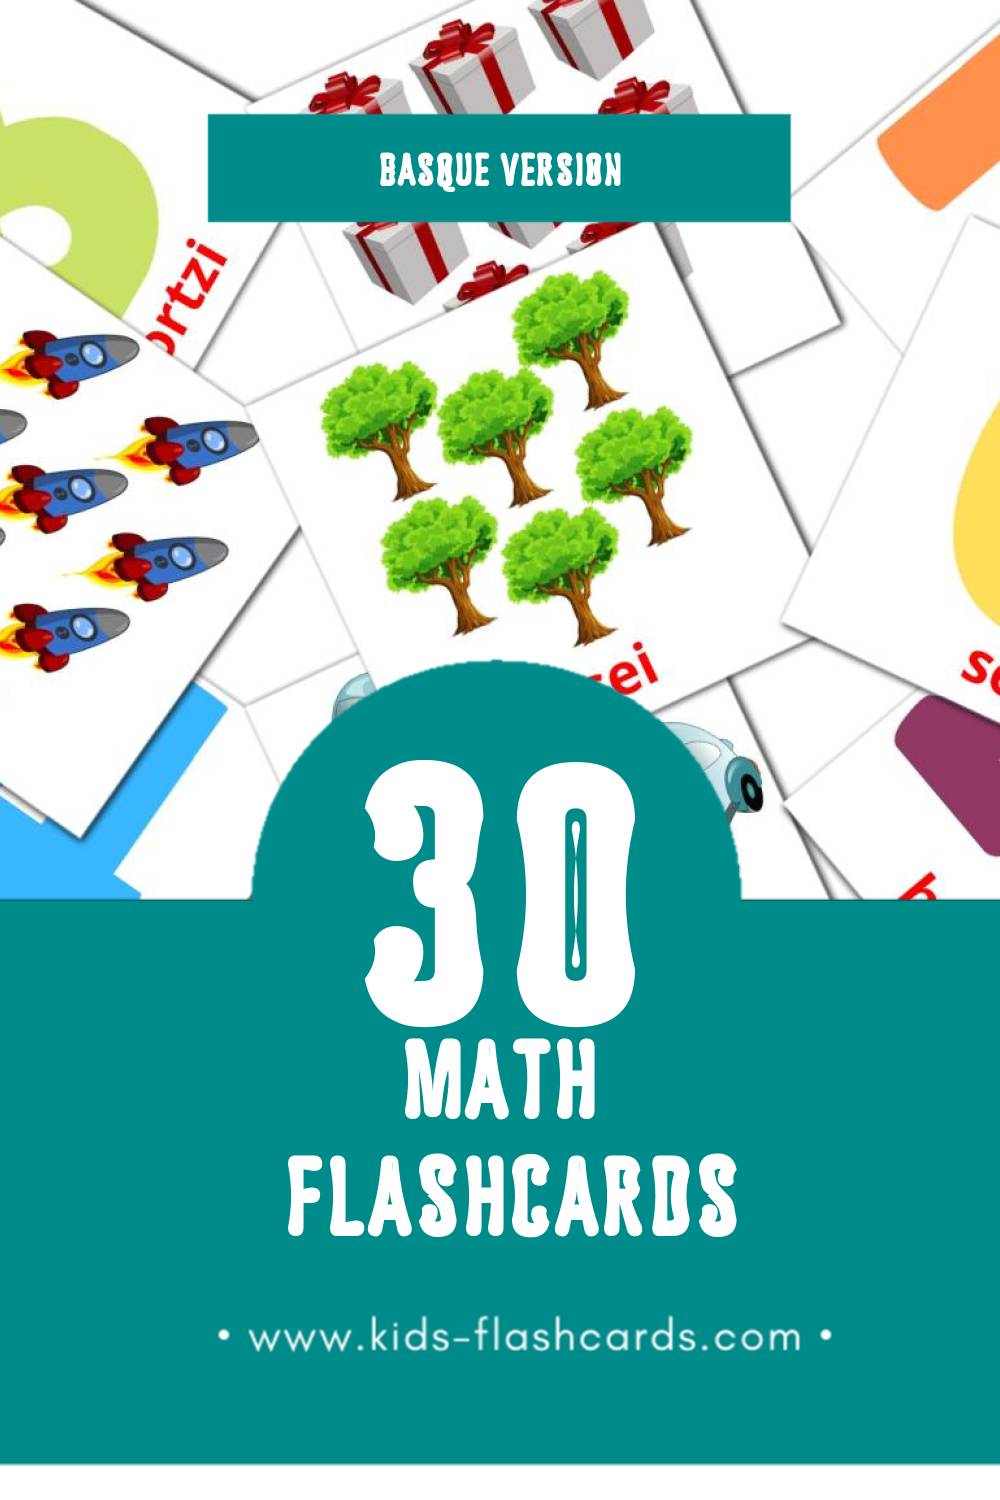 Visual Matematikak Flashcards for Toddlers (30 cards in Basque)